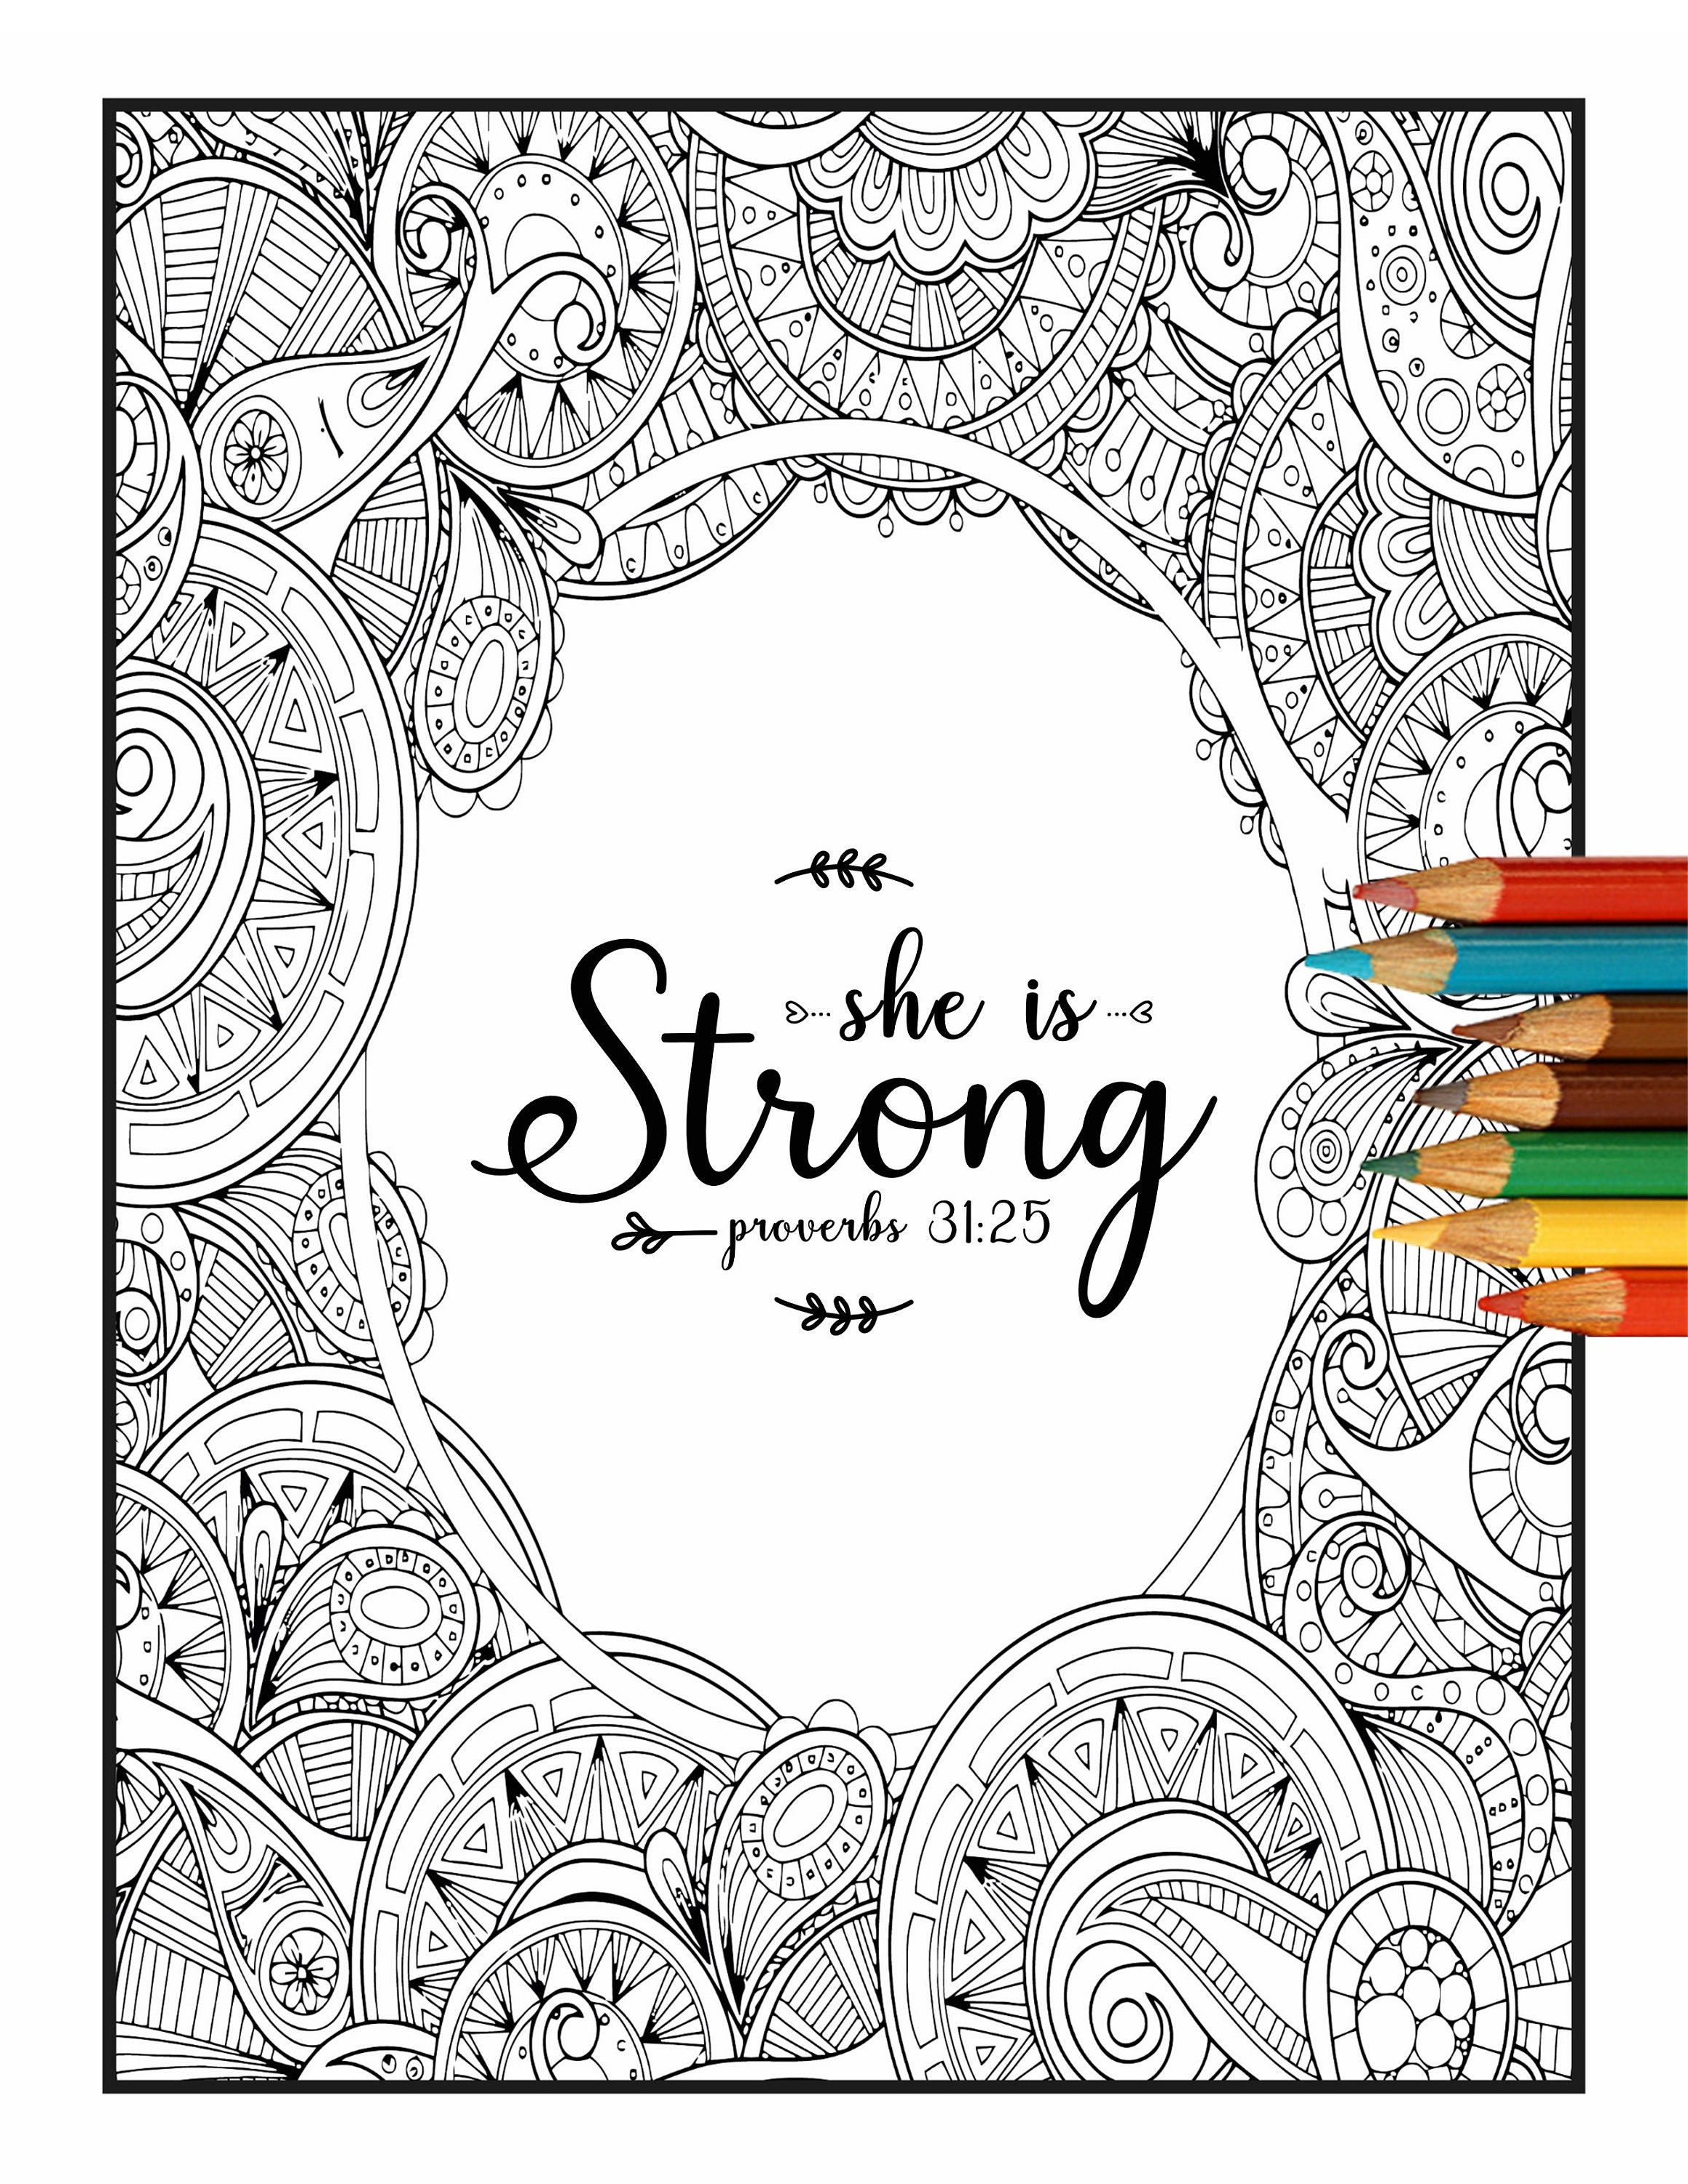 Proverbs she is strong printable bible verse coloring scripture coloring page mothers day gift friend birthday gift wall art